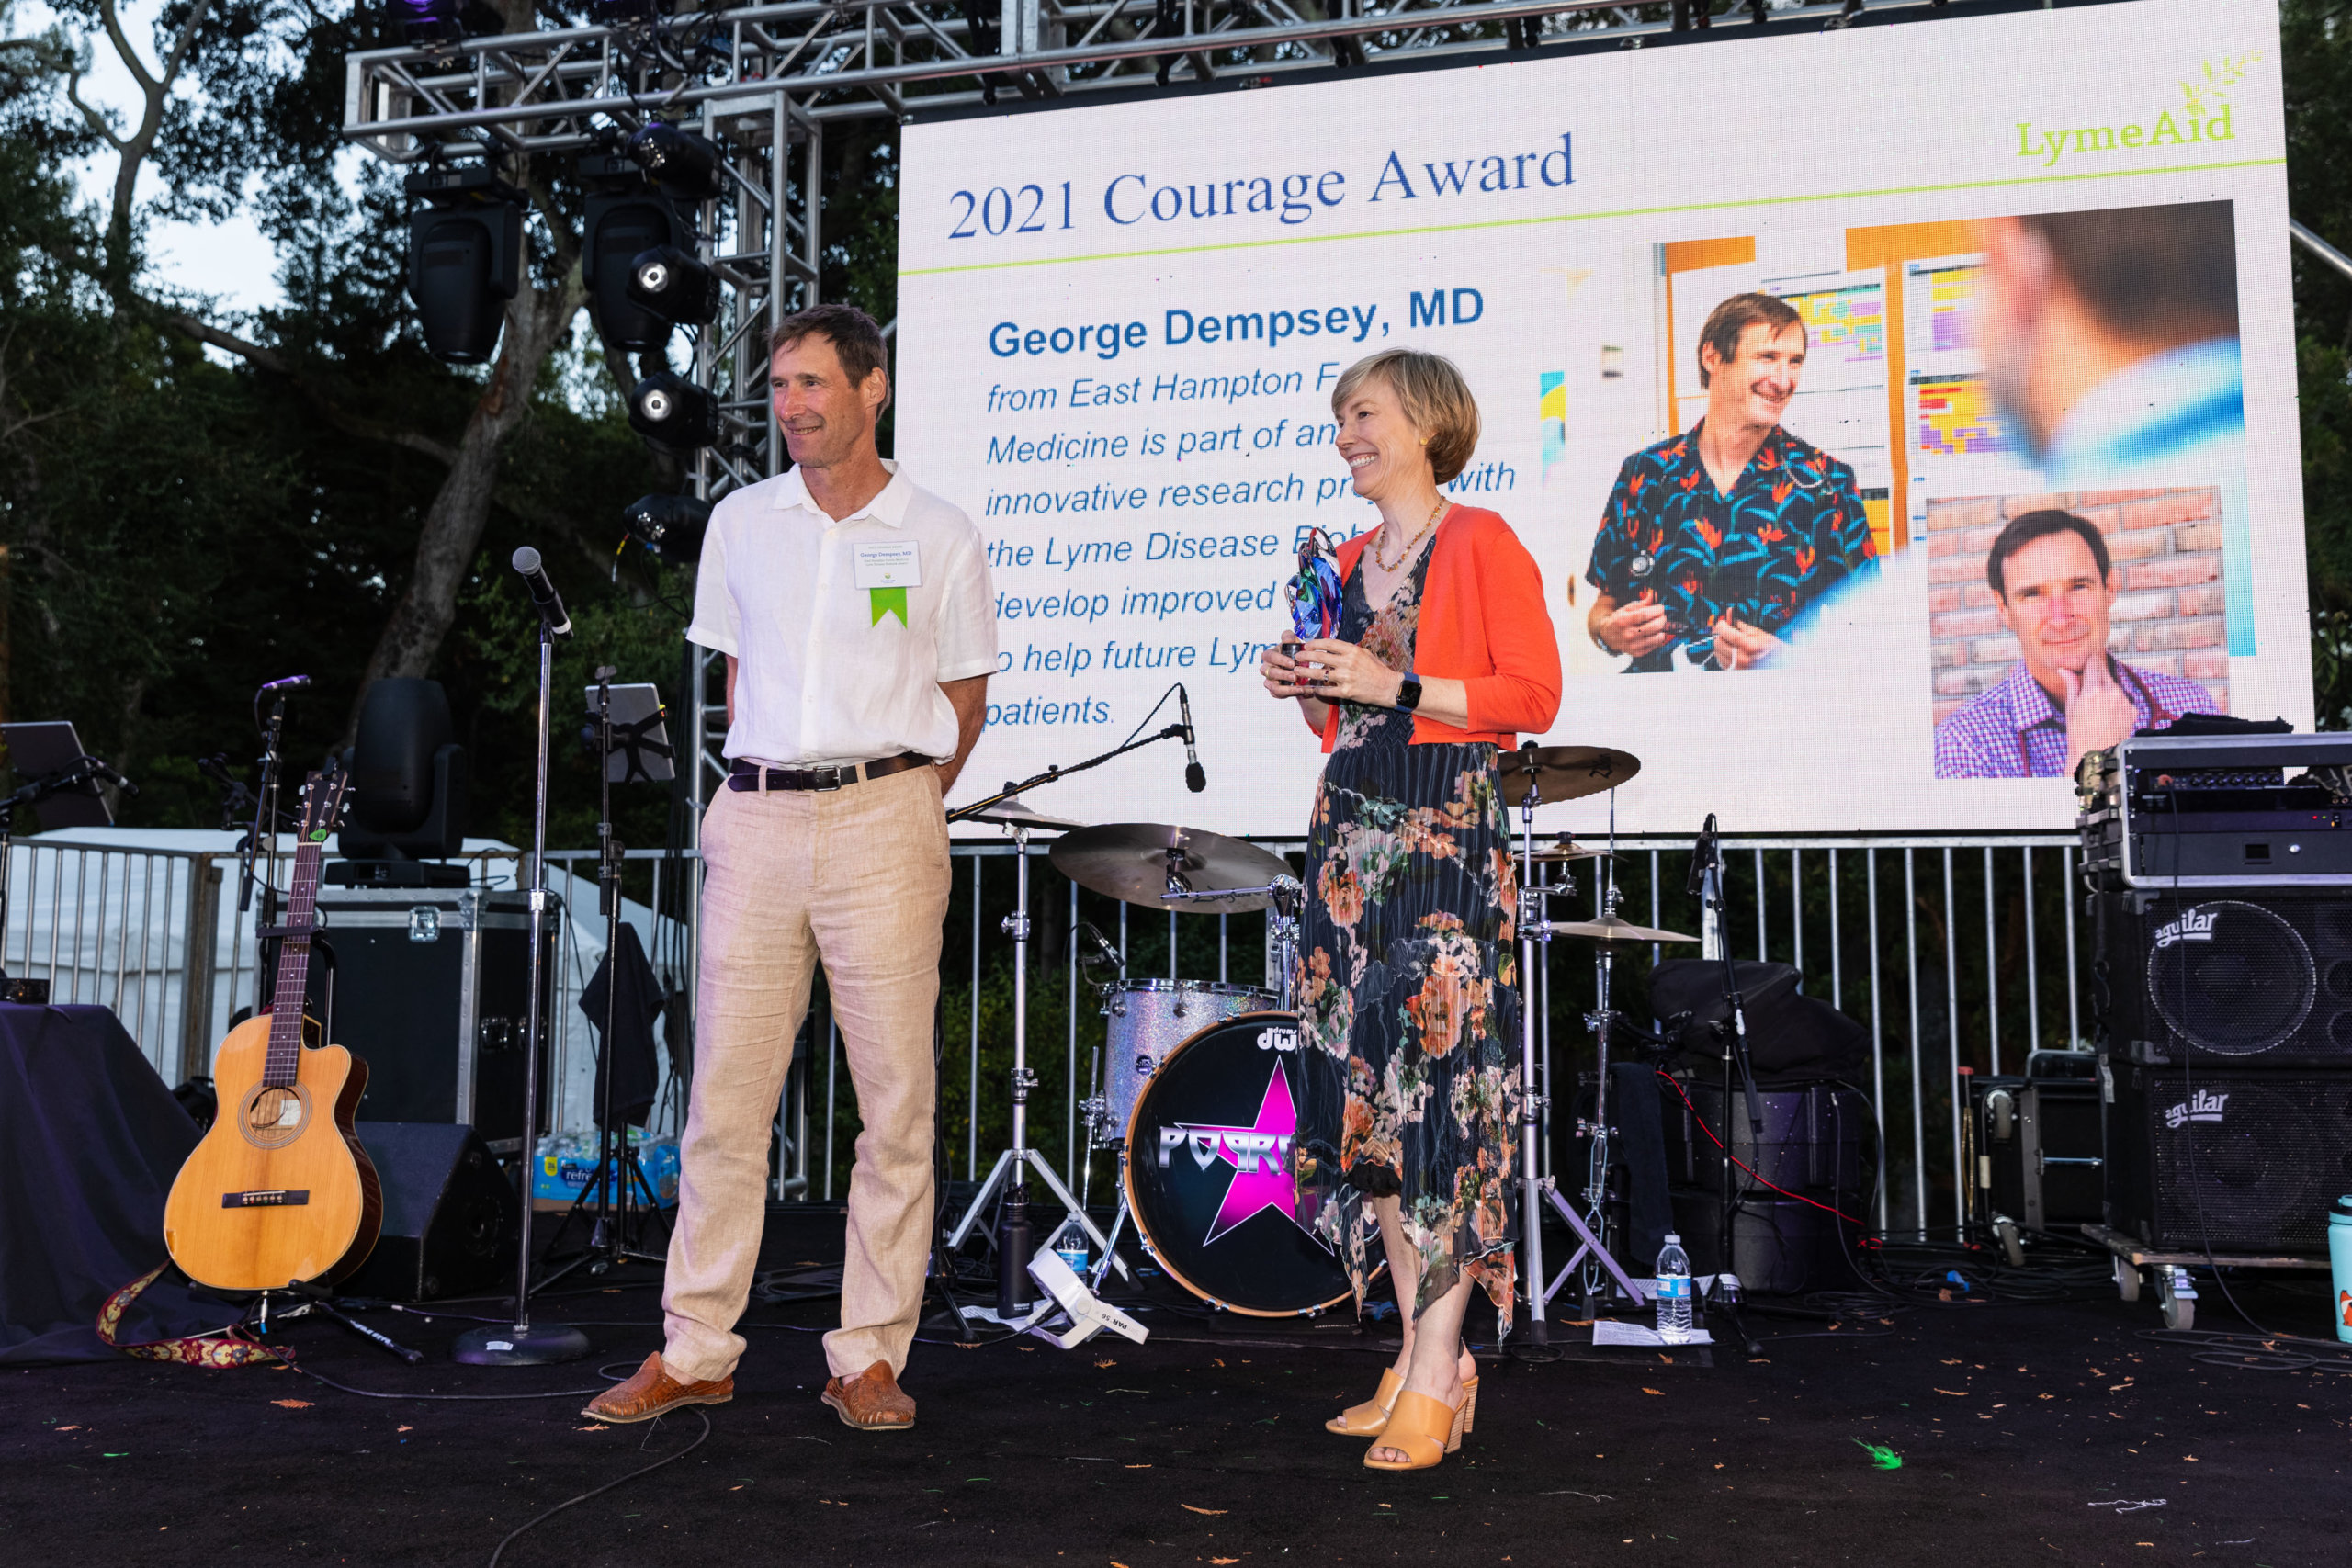 Dr. George Dempsey received his Courage Award at LymeAid Benefiting The Bay Area Lyme Foundation on September 18 2021 in Portola Valley, CA